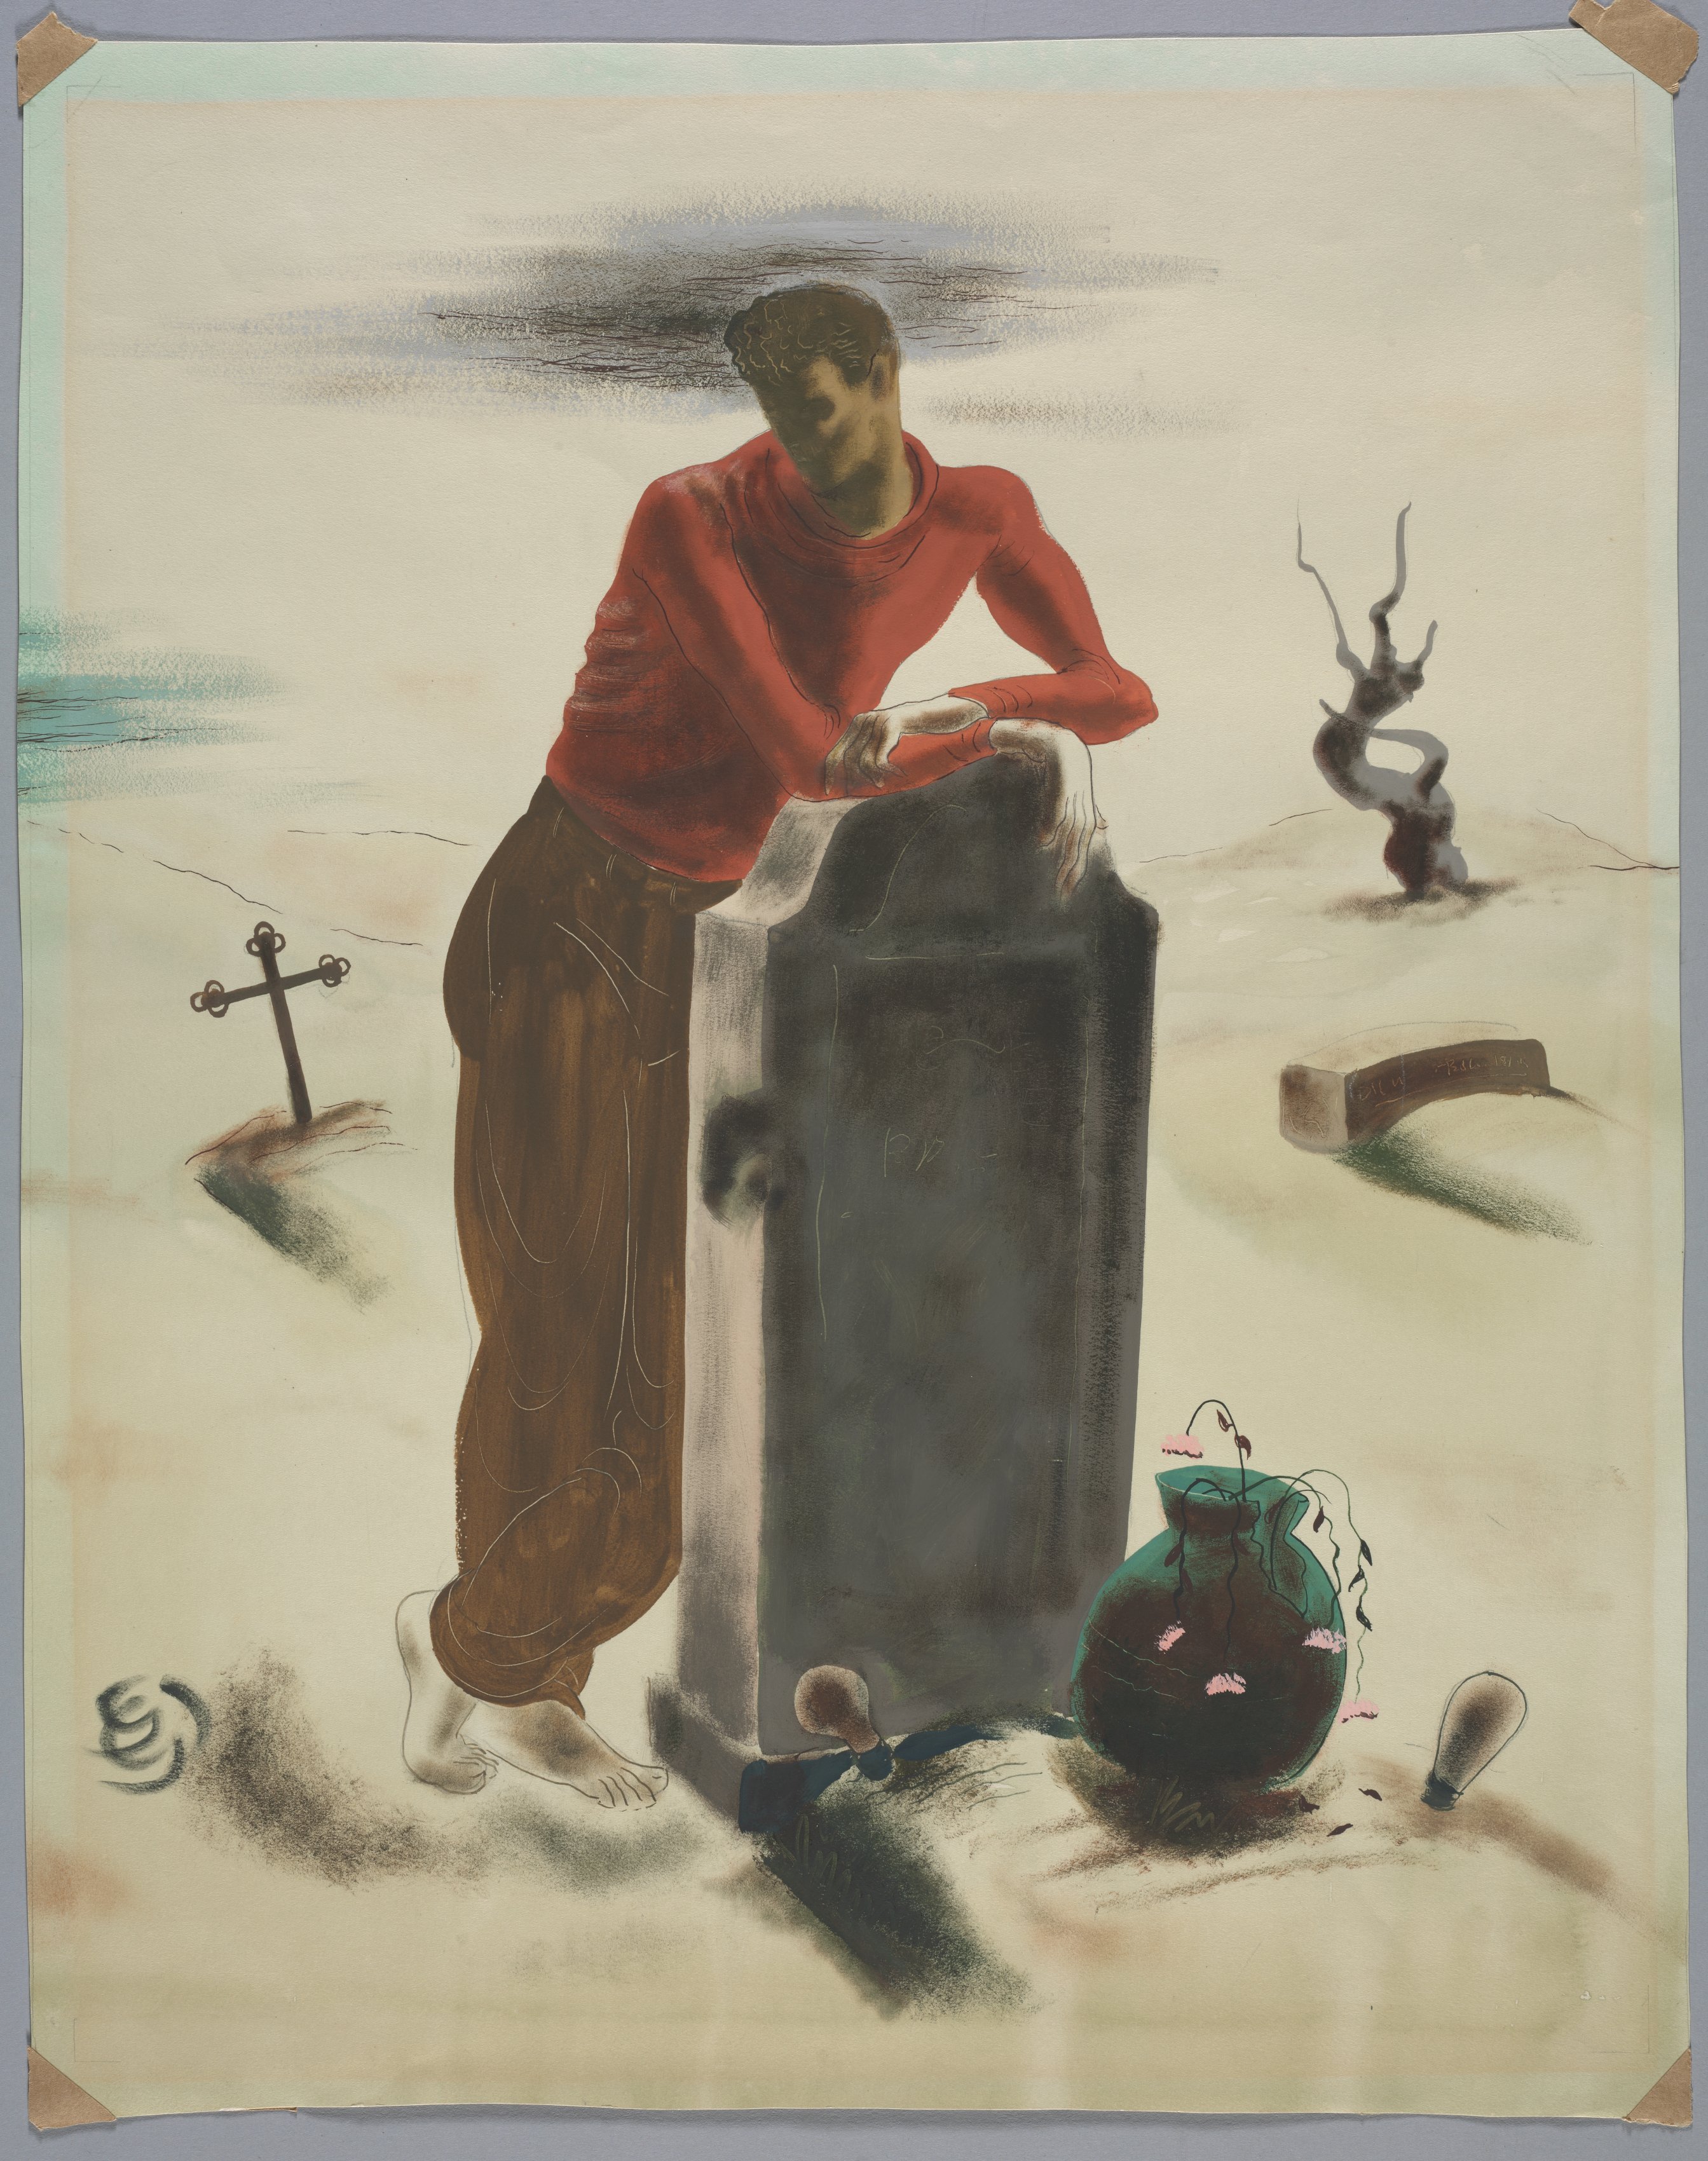 Youth at a Grave